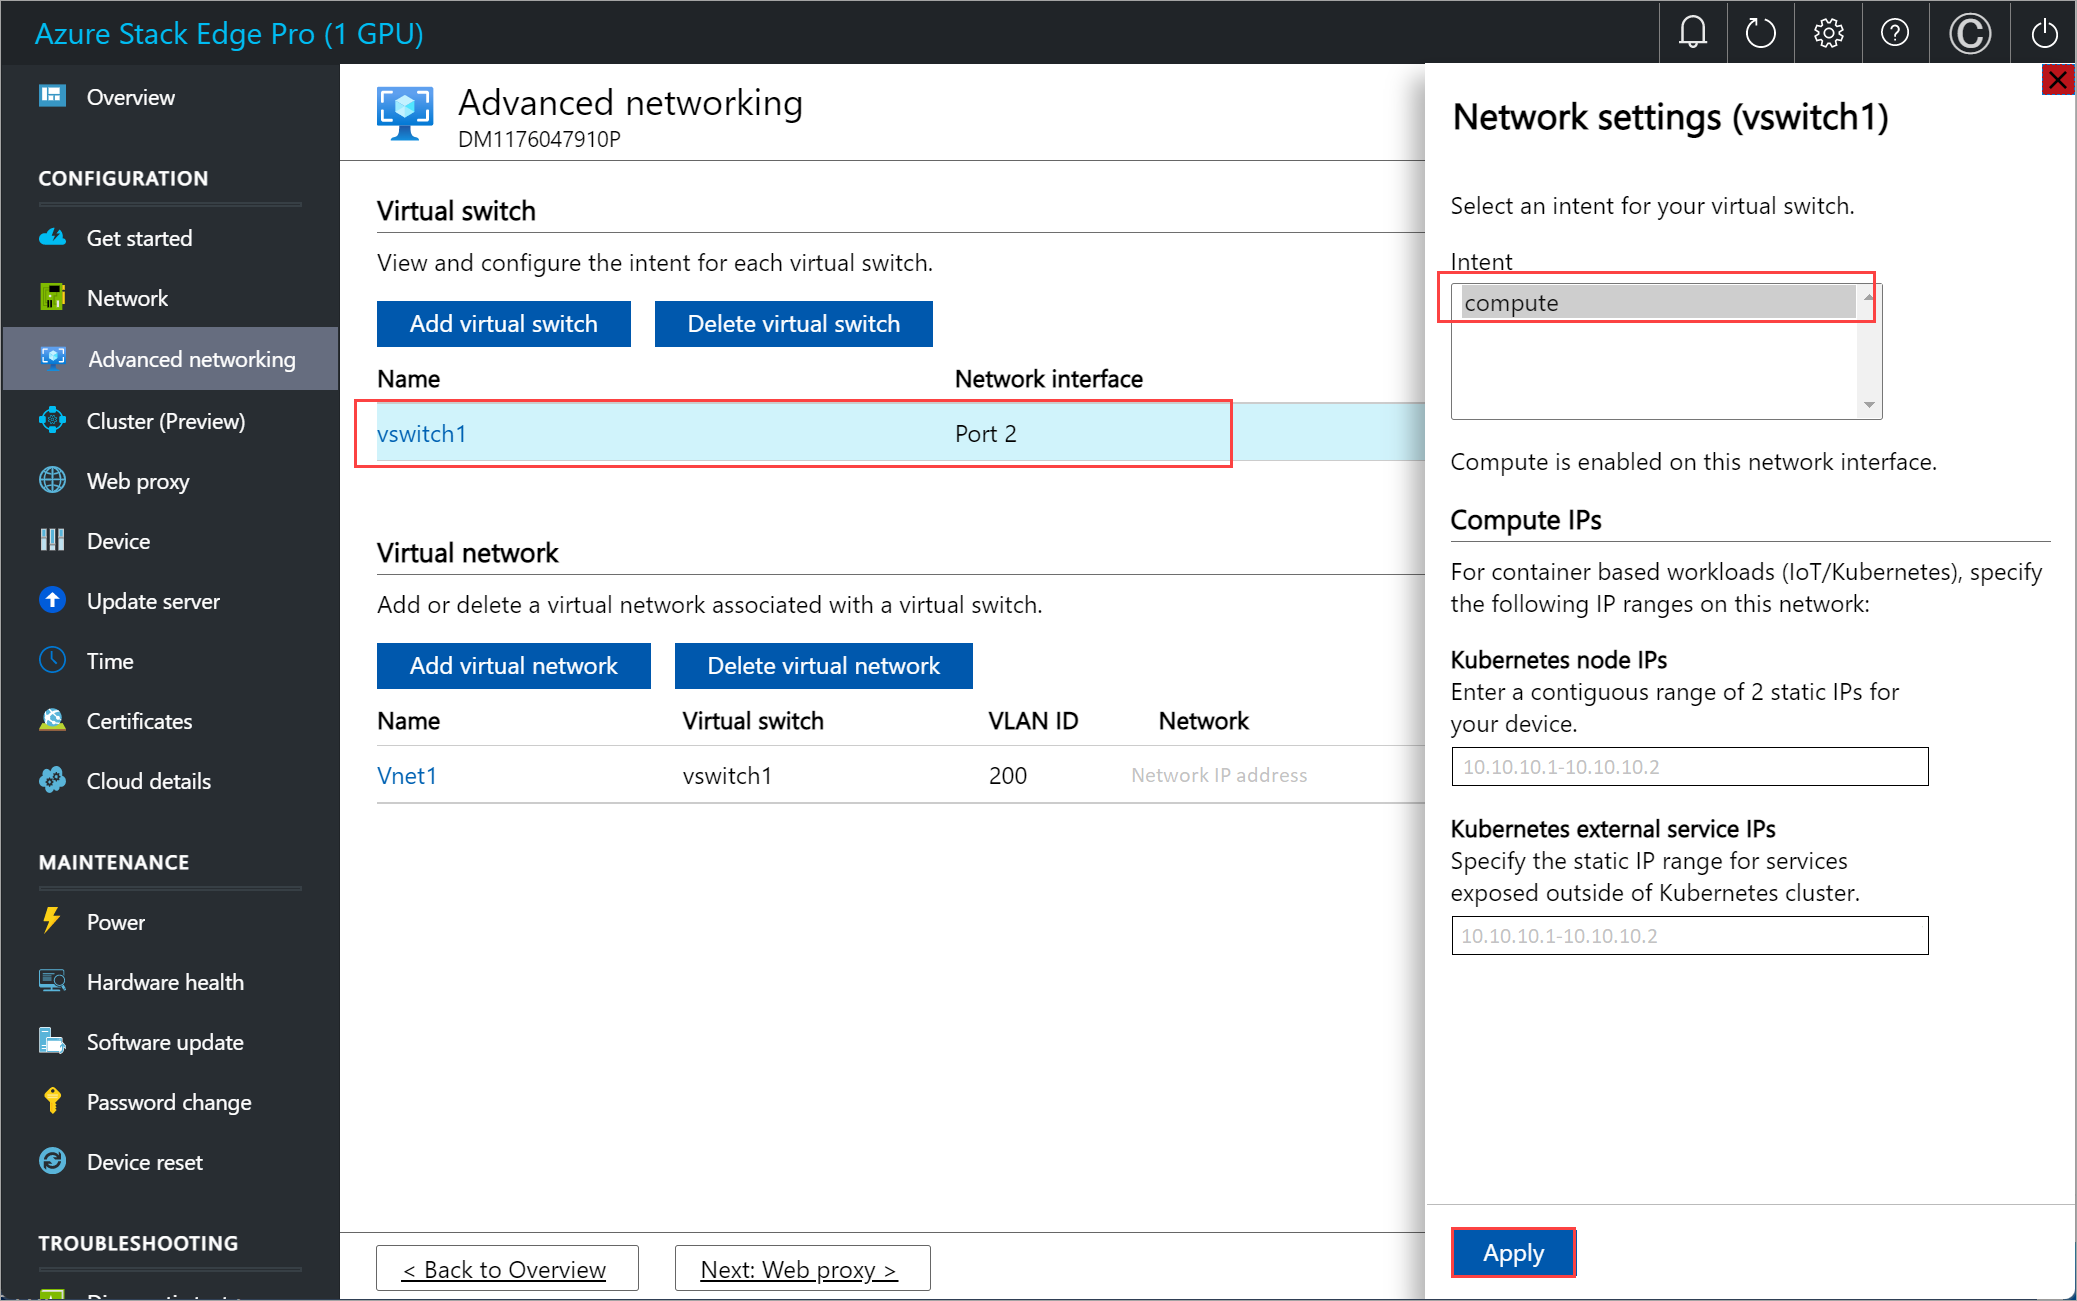 Screenshot of the Advanced networking pane for an Azure Stack Edge device. Network settings for Port 2 are highlighted.